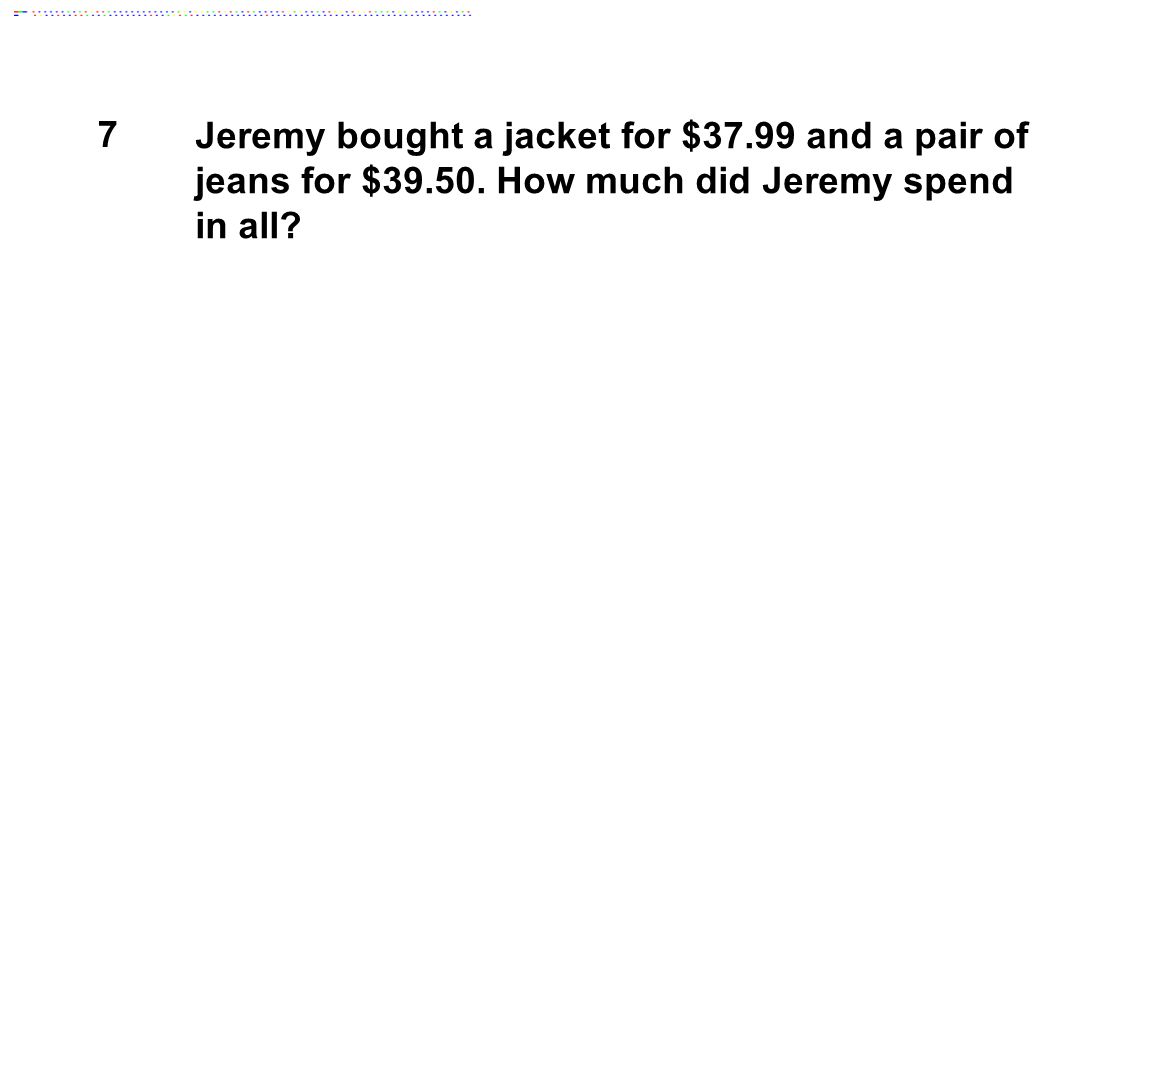 7 Jeremy bought a jacket for $37.99 and a pair of jeans for $39.50.